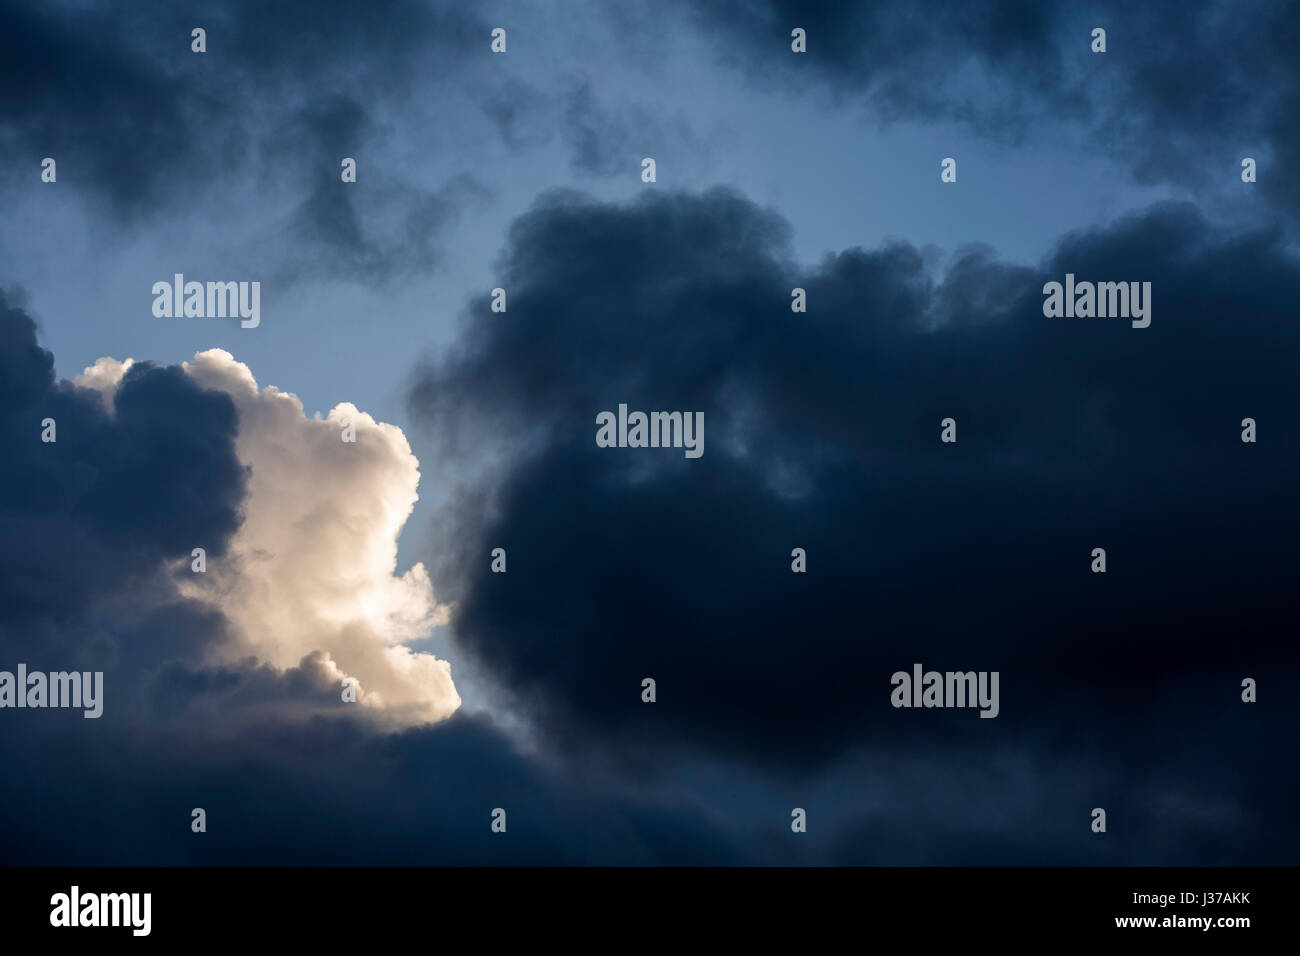 Cumulonimbus clouds at dawn with sun hitting one cloud highlighting it behind the other dark clouds Stock Photo